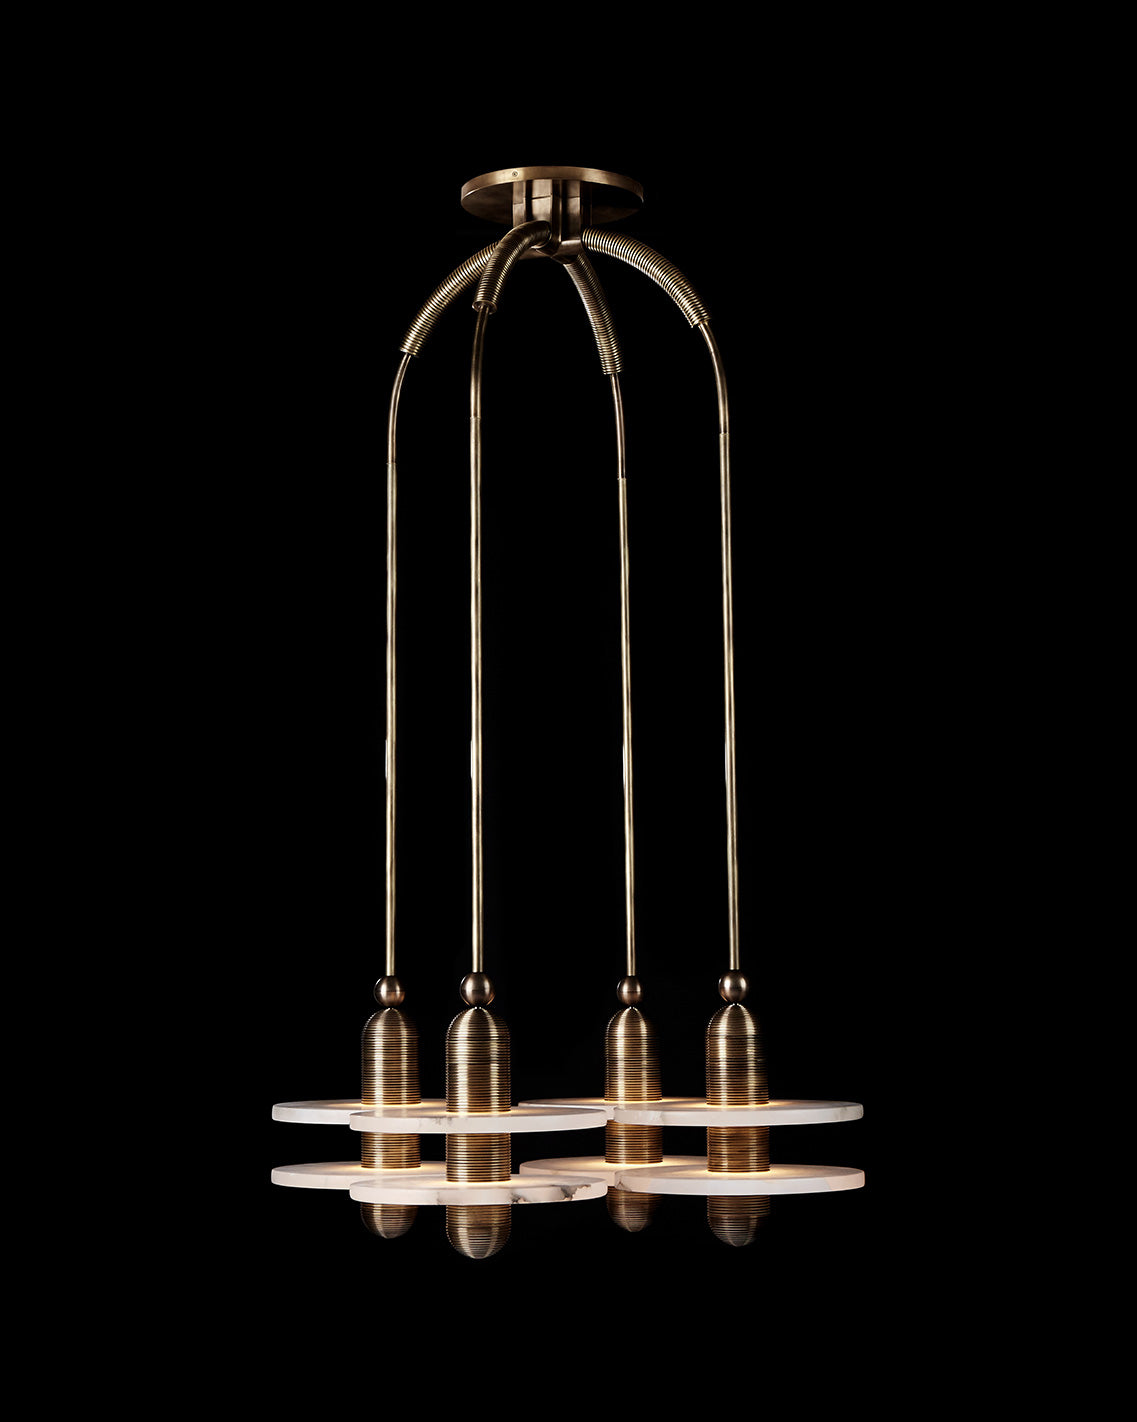 MEDIAN : 4 ceiling pendant in Aged Brass finish, hanging against a black background.